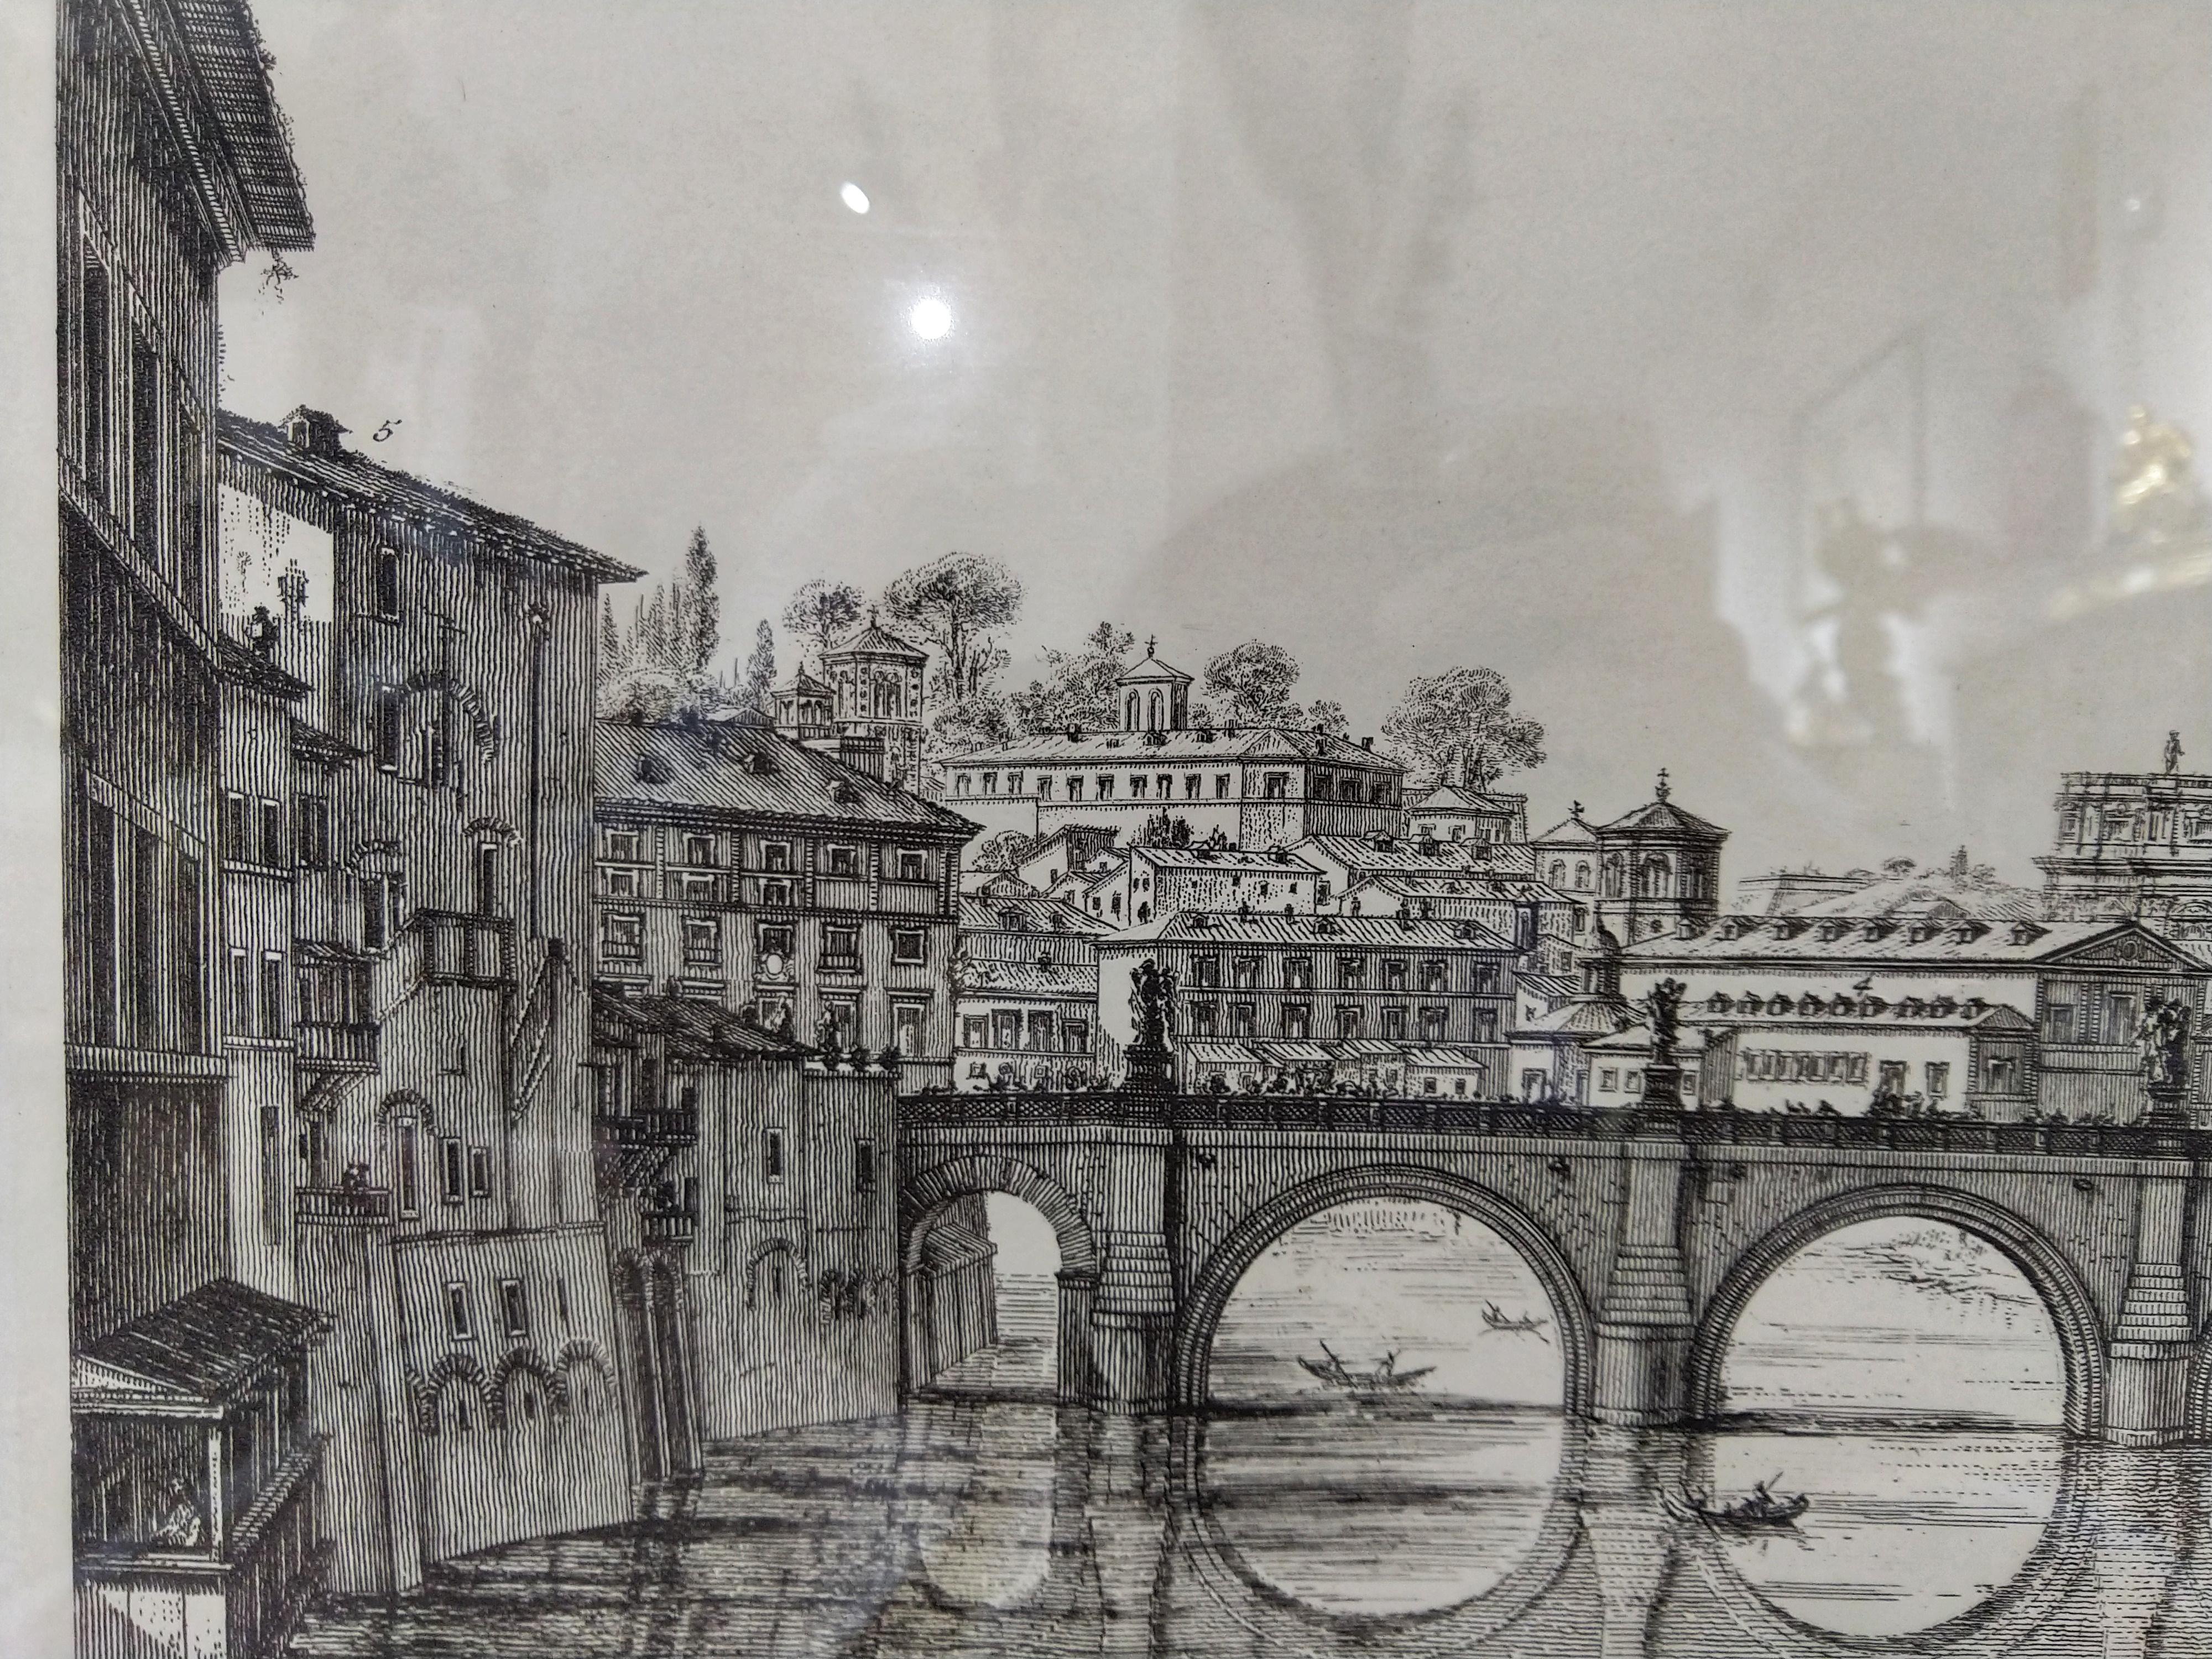 Beautiful Roman print, depicting the Tiber with various genre scenes. In the central part we can see the San'Angelo bridge with its reflection in the river, on the right Castel Sant'Angelo and in the center at the bottom the St. Peter's Basilica.